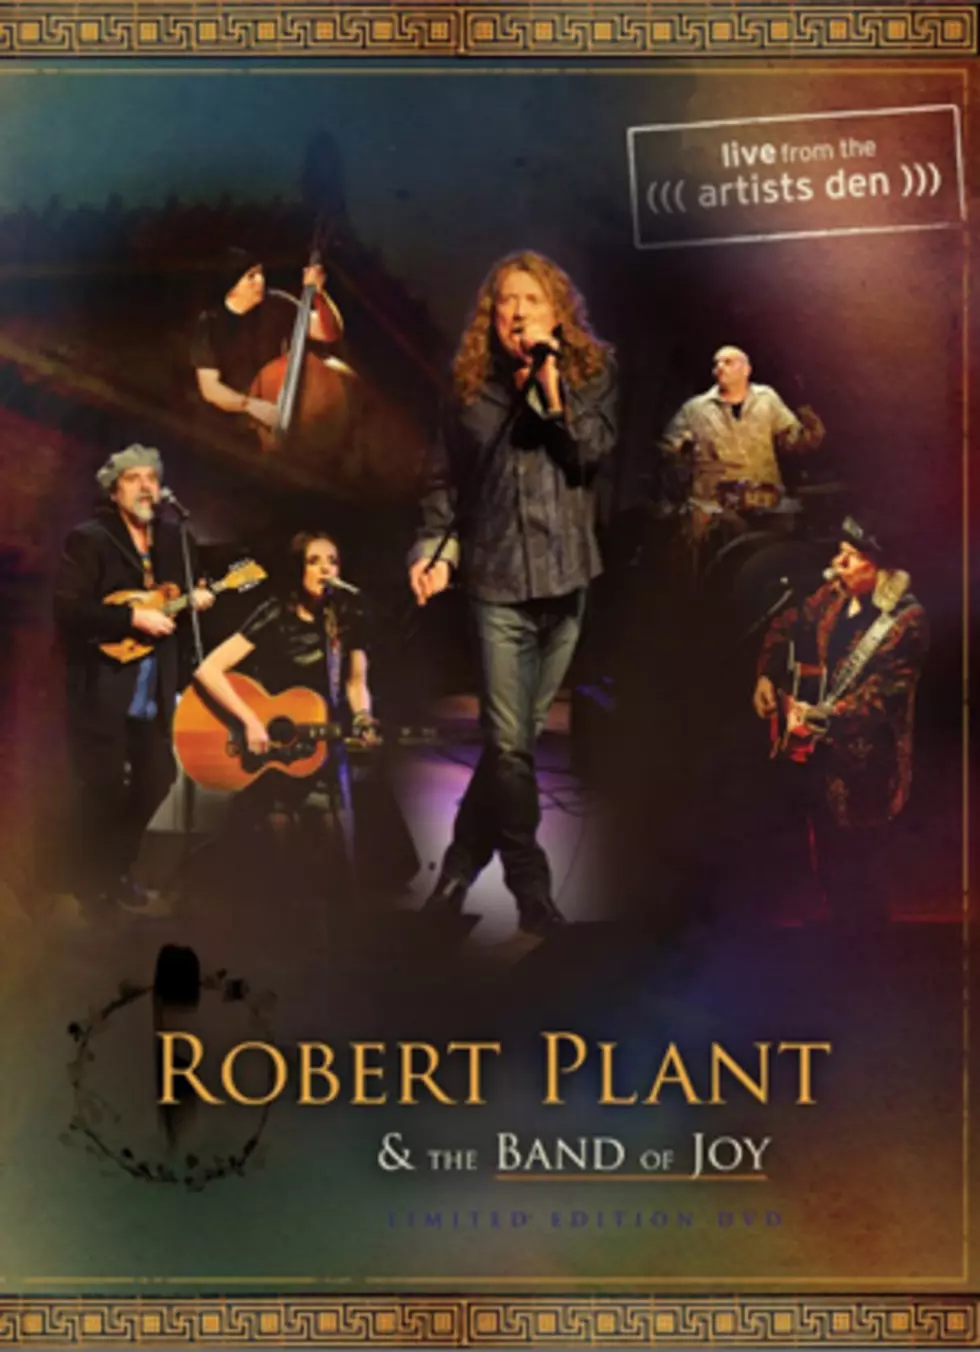 Robert Plant &#038; the Band of Joy &#8211; &#8216;Live from the Artists Den&#8217; &#8211; DVD Review